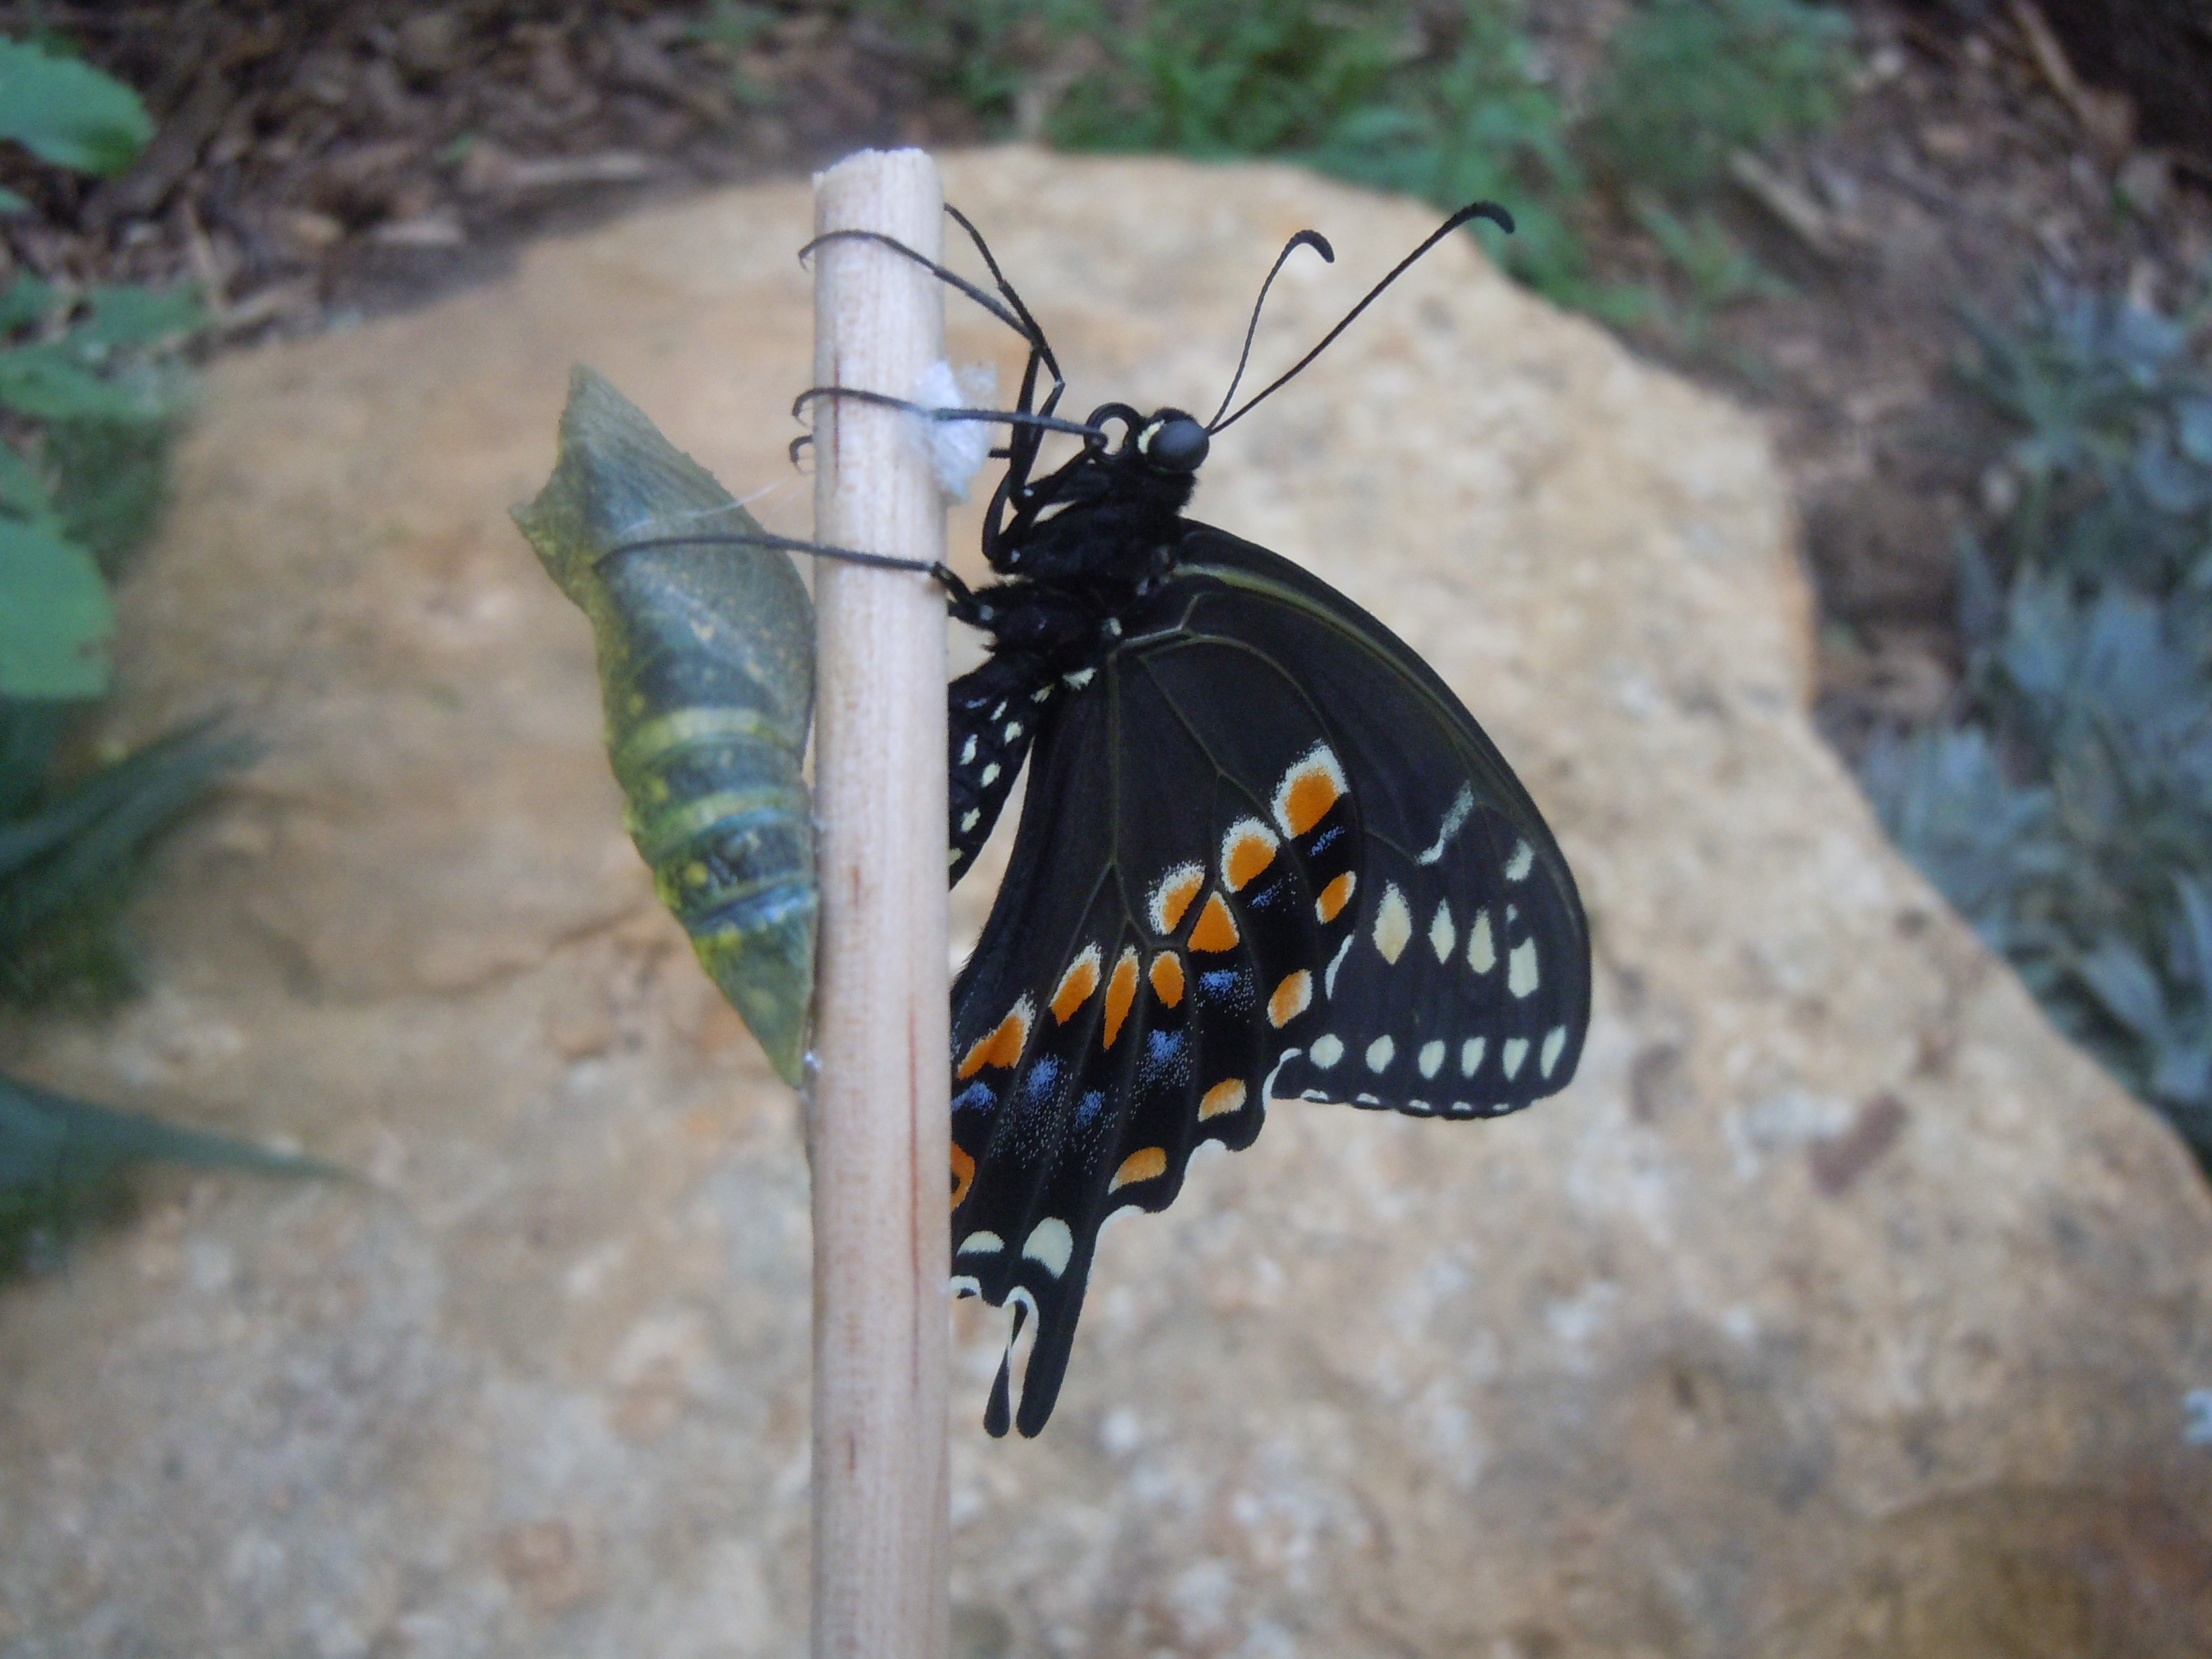 Eastern Swallowtail and Sister Chrysalis on a Chopstick